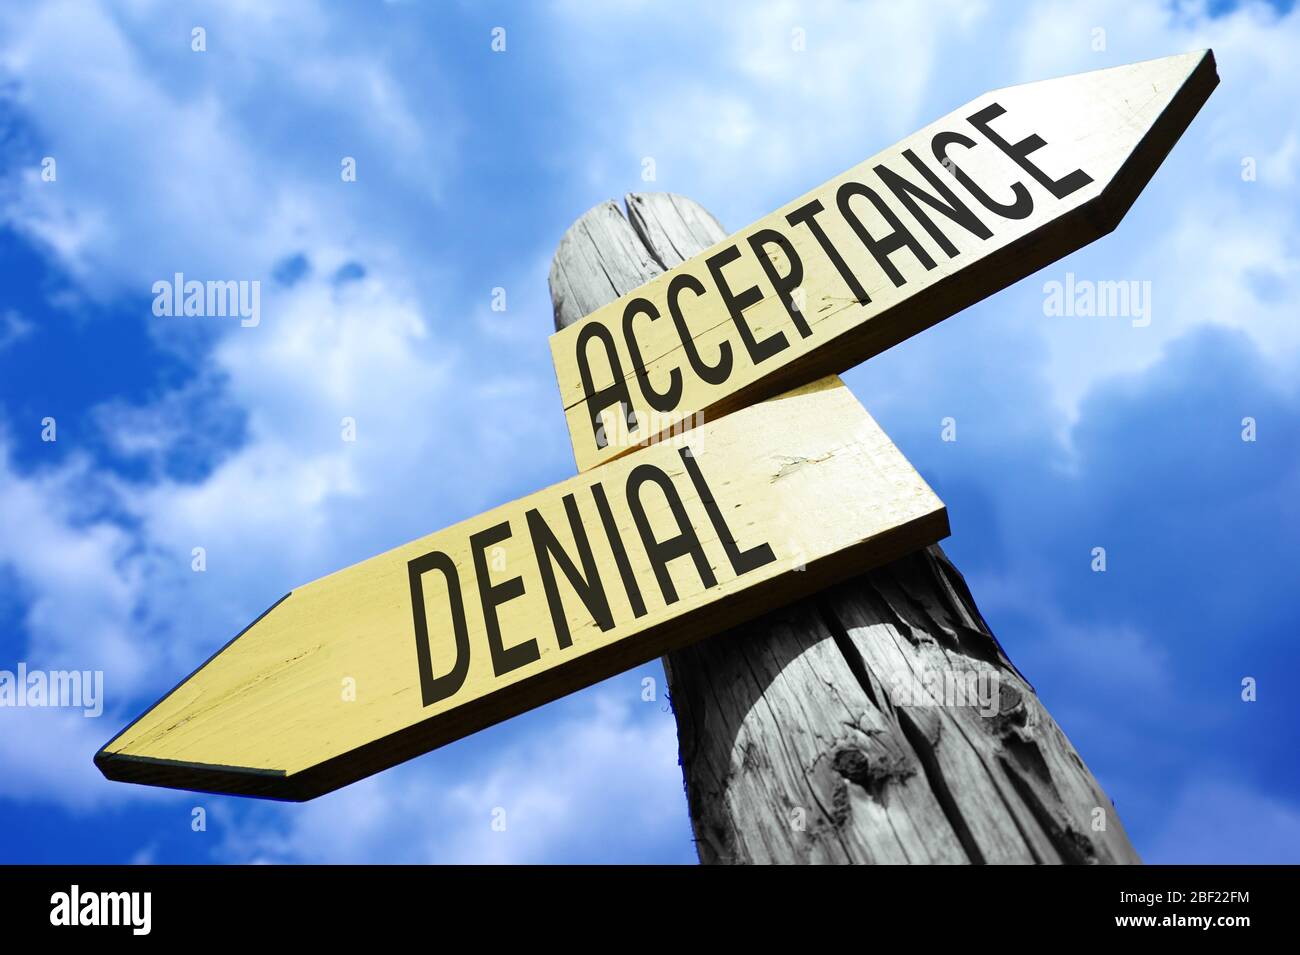 Acceptance, denial - wooden signpost Stock Photo